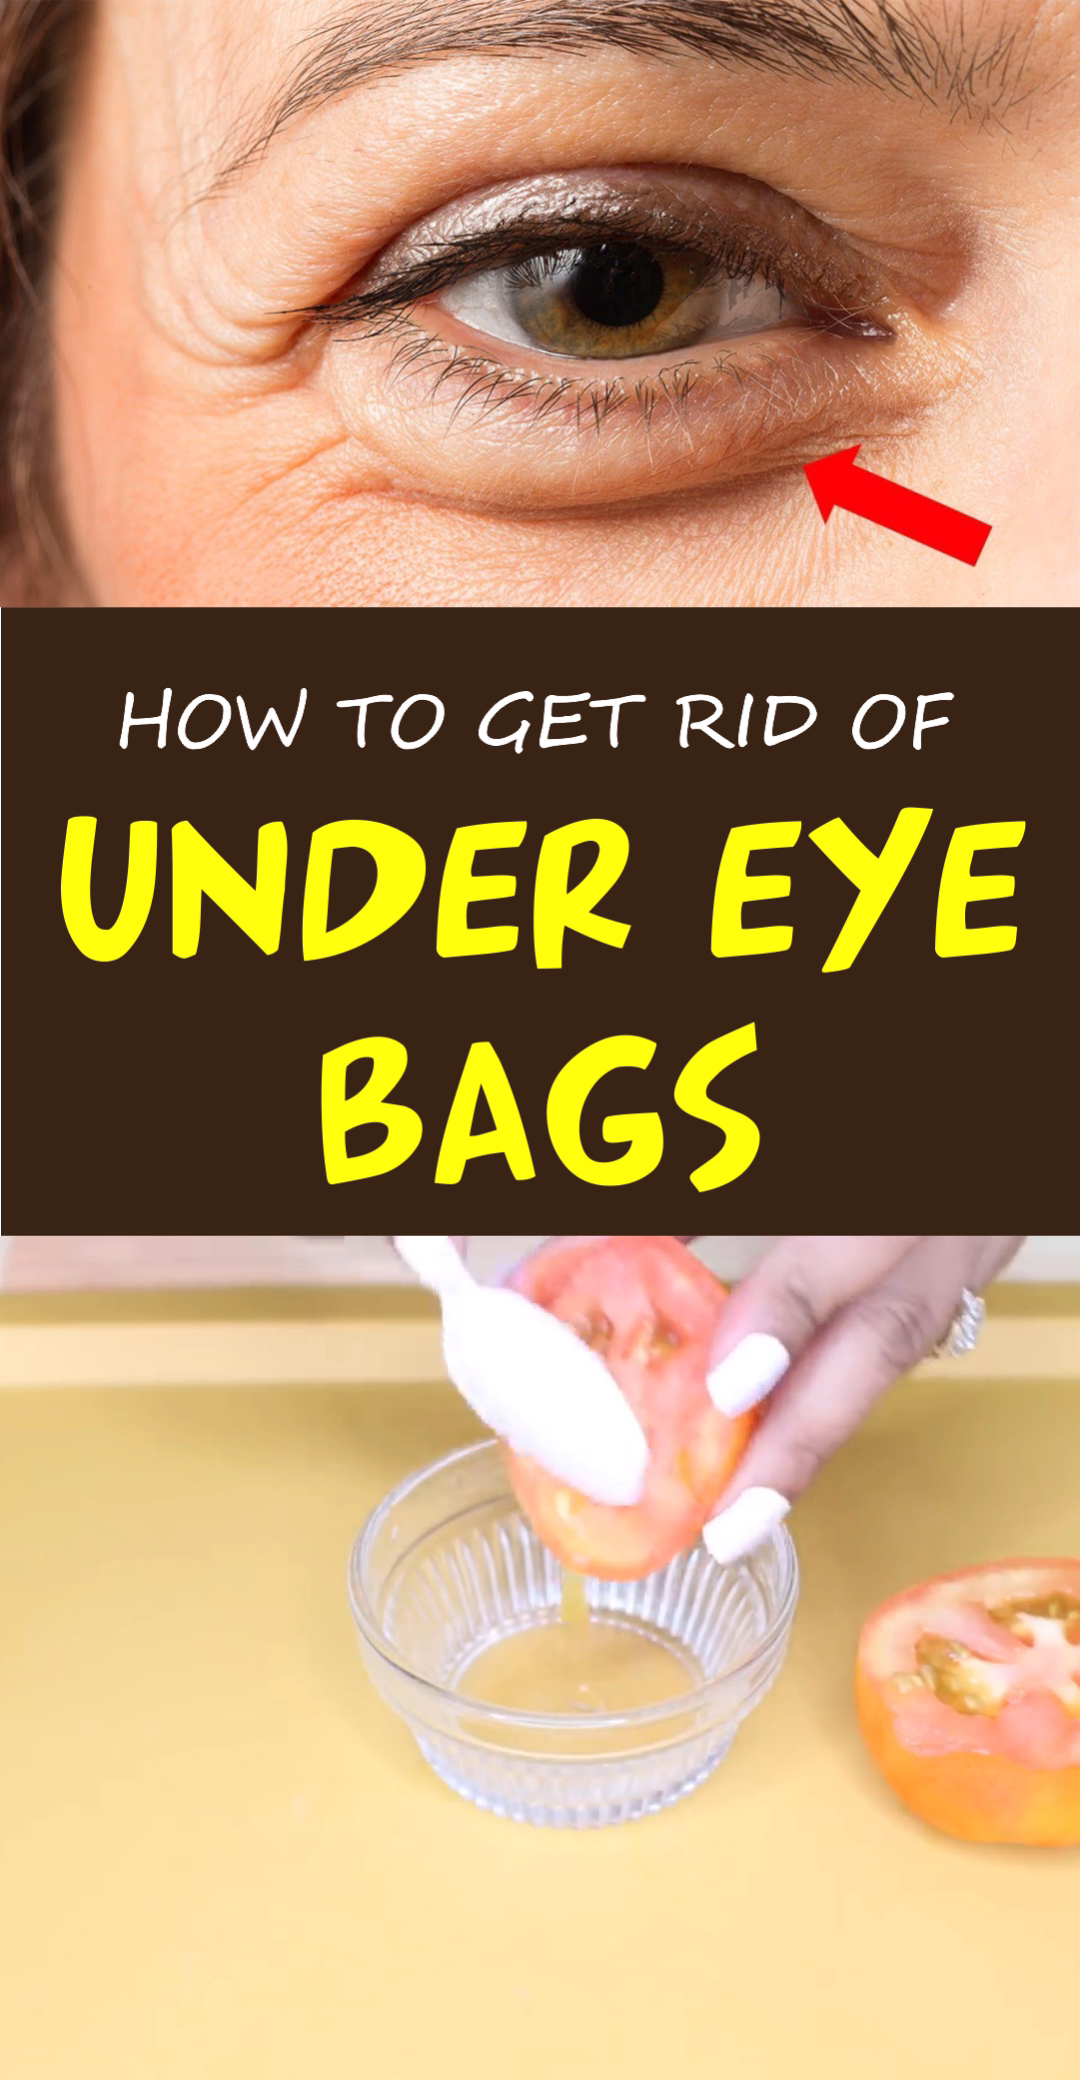 How to Get Rid of Dark Circles Under Your Eyes: Top 9 Home Remedies that Work - How to Get Rid of Dark Circles Under Your Eyes: Top 9 Home Remedies that Work -   17 morning beauty Tips ideas